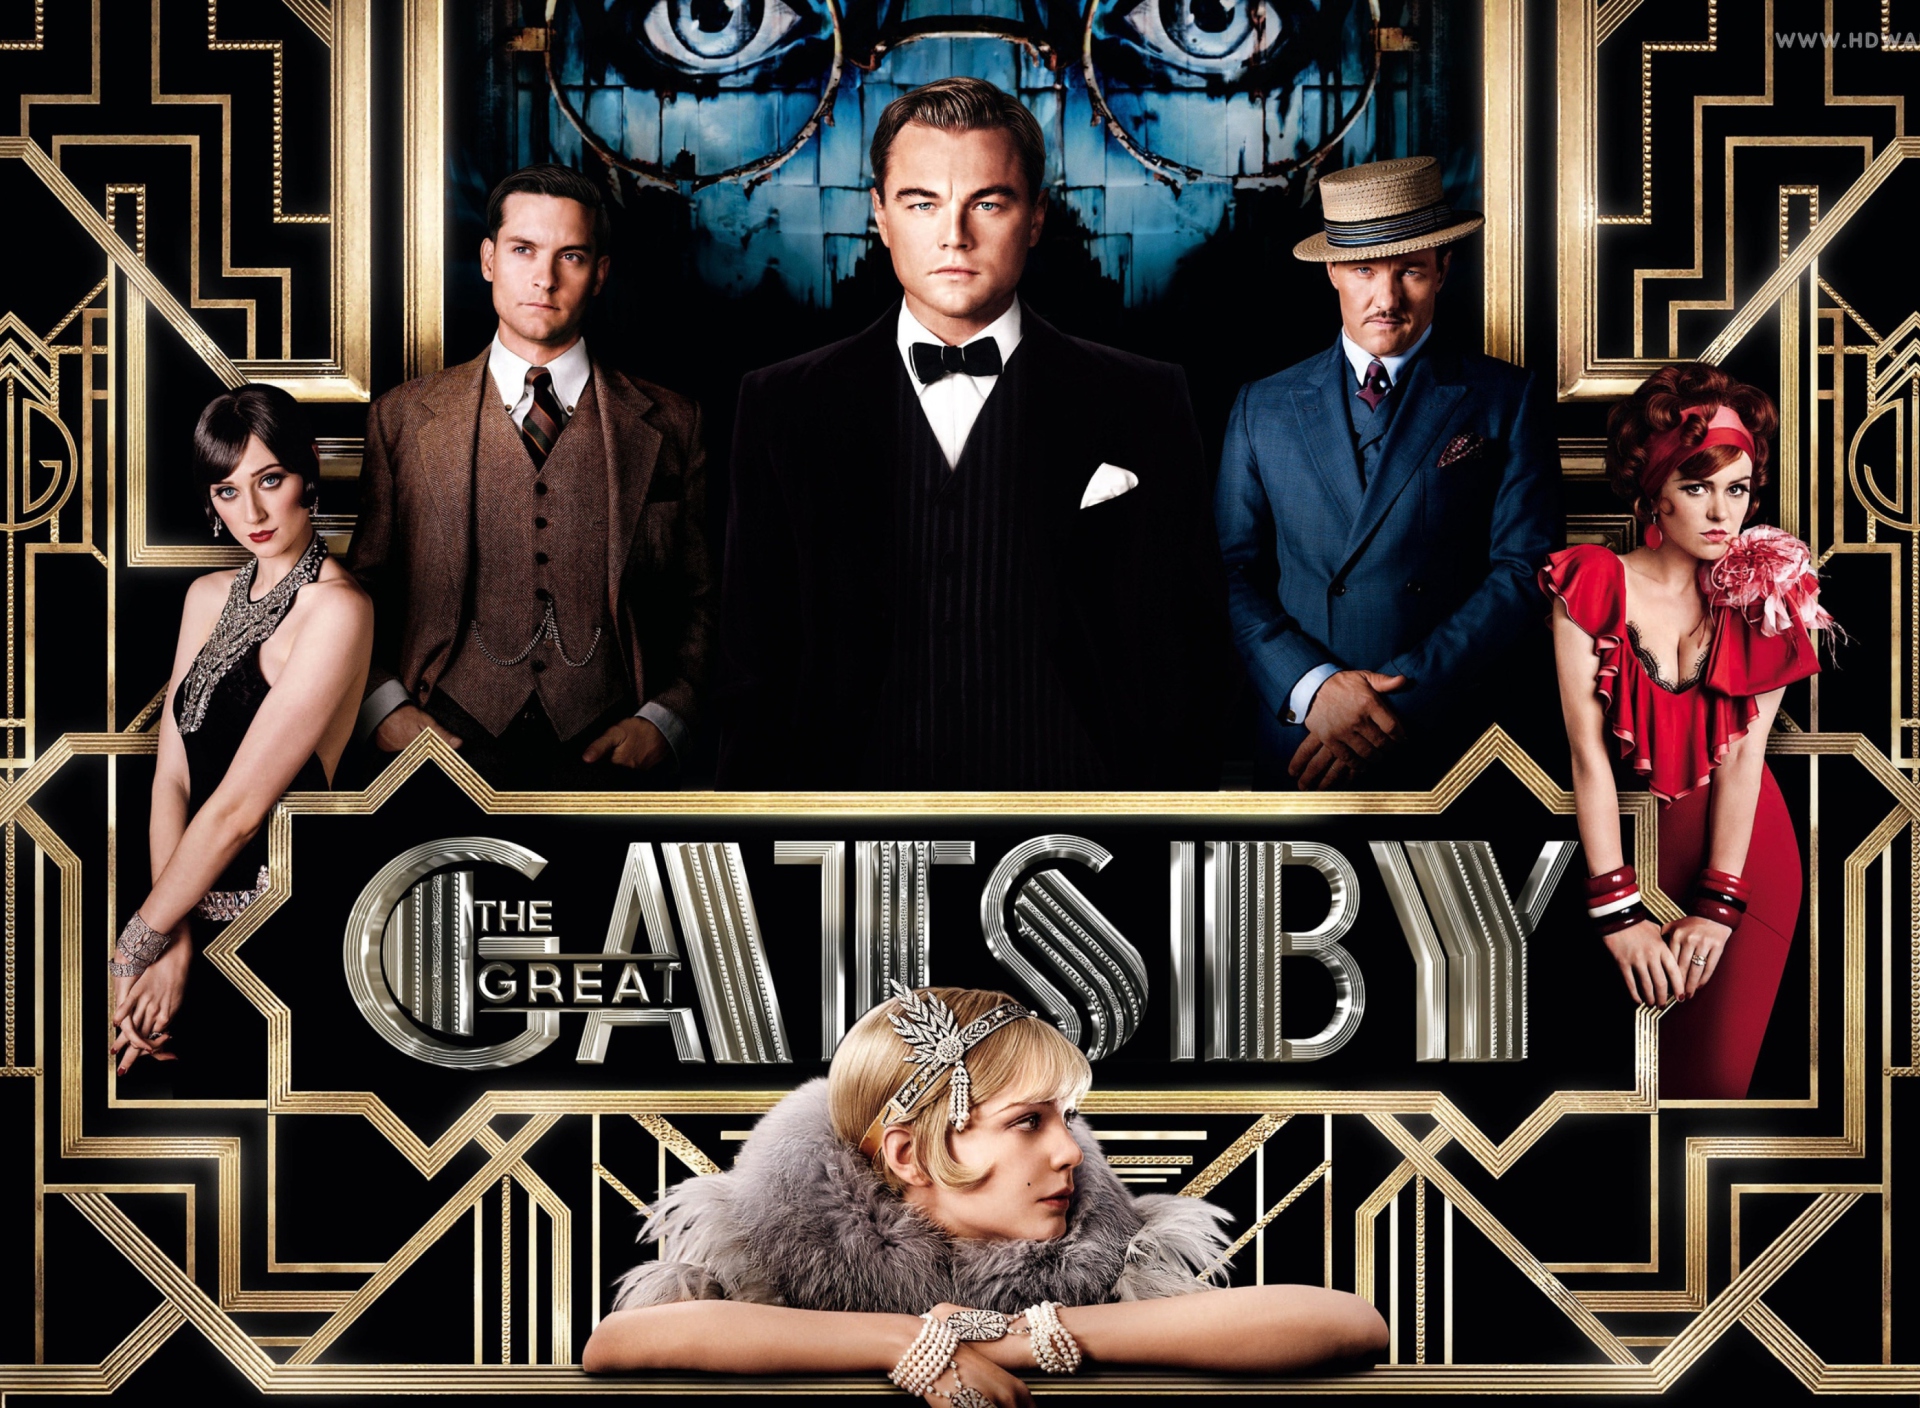 The Great Gatsby Movie wallpaper 1920x1408